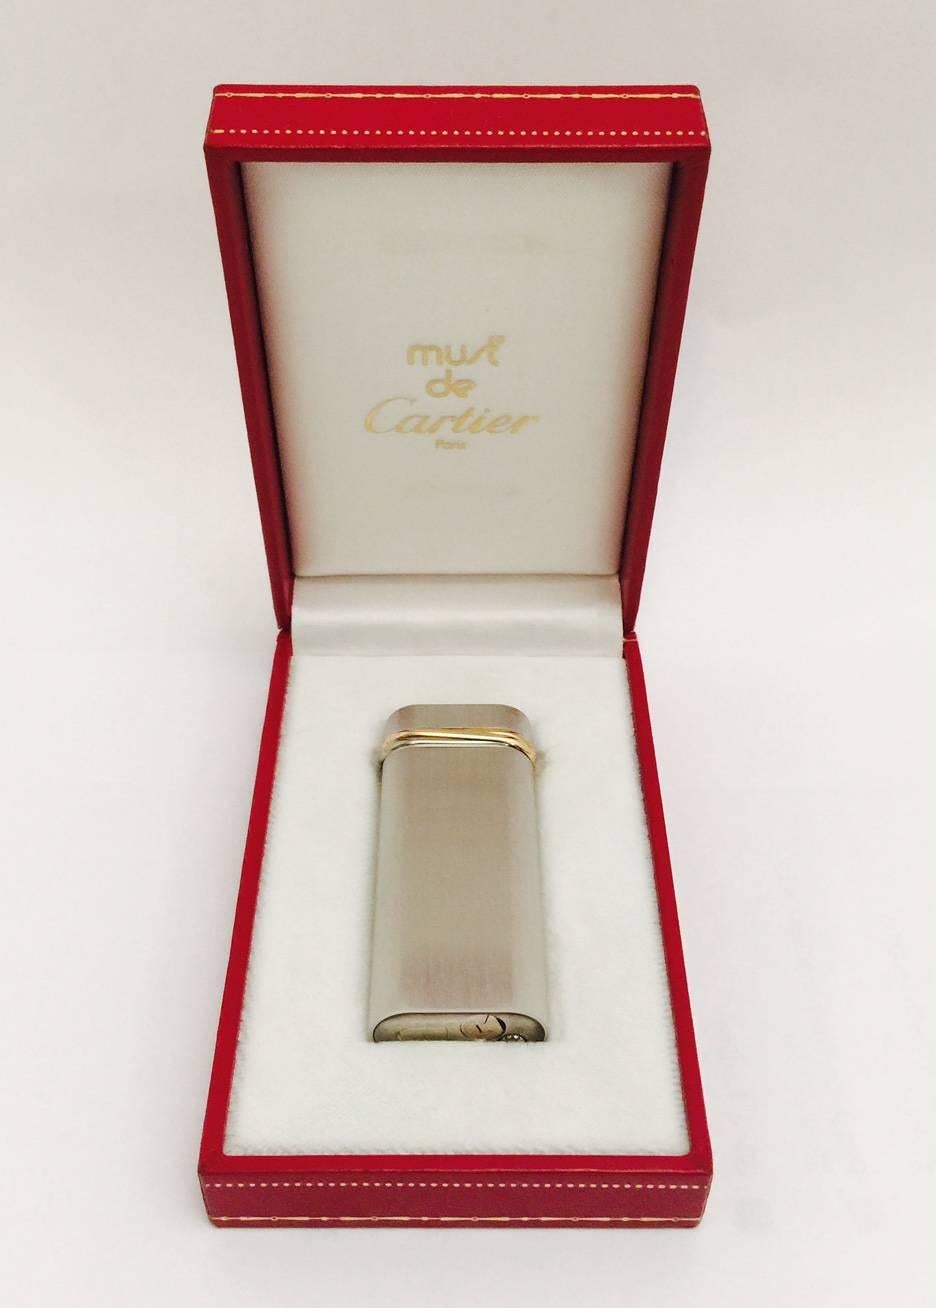 Cartier ca. 1990's Lighter in Silver Plate, Brand New in Box.  A handsome lighter, in a brushed satin finish, embellished with a gold tone band.